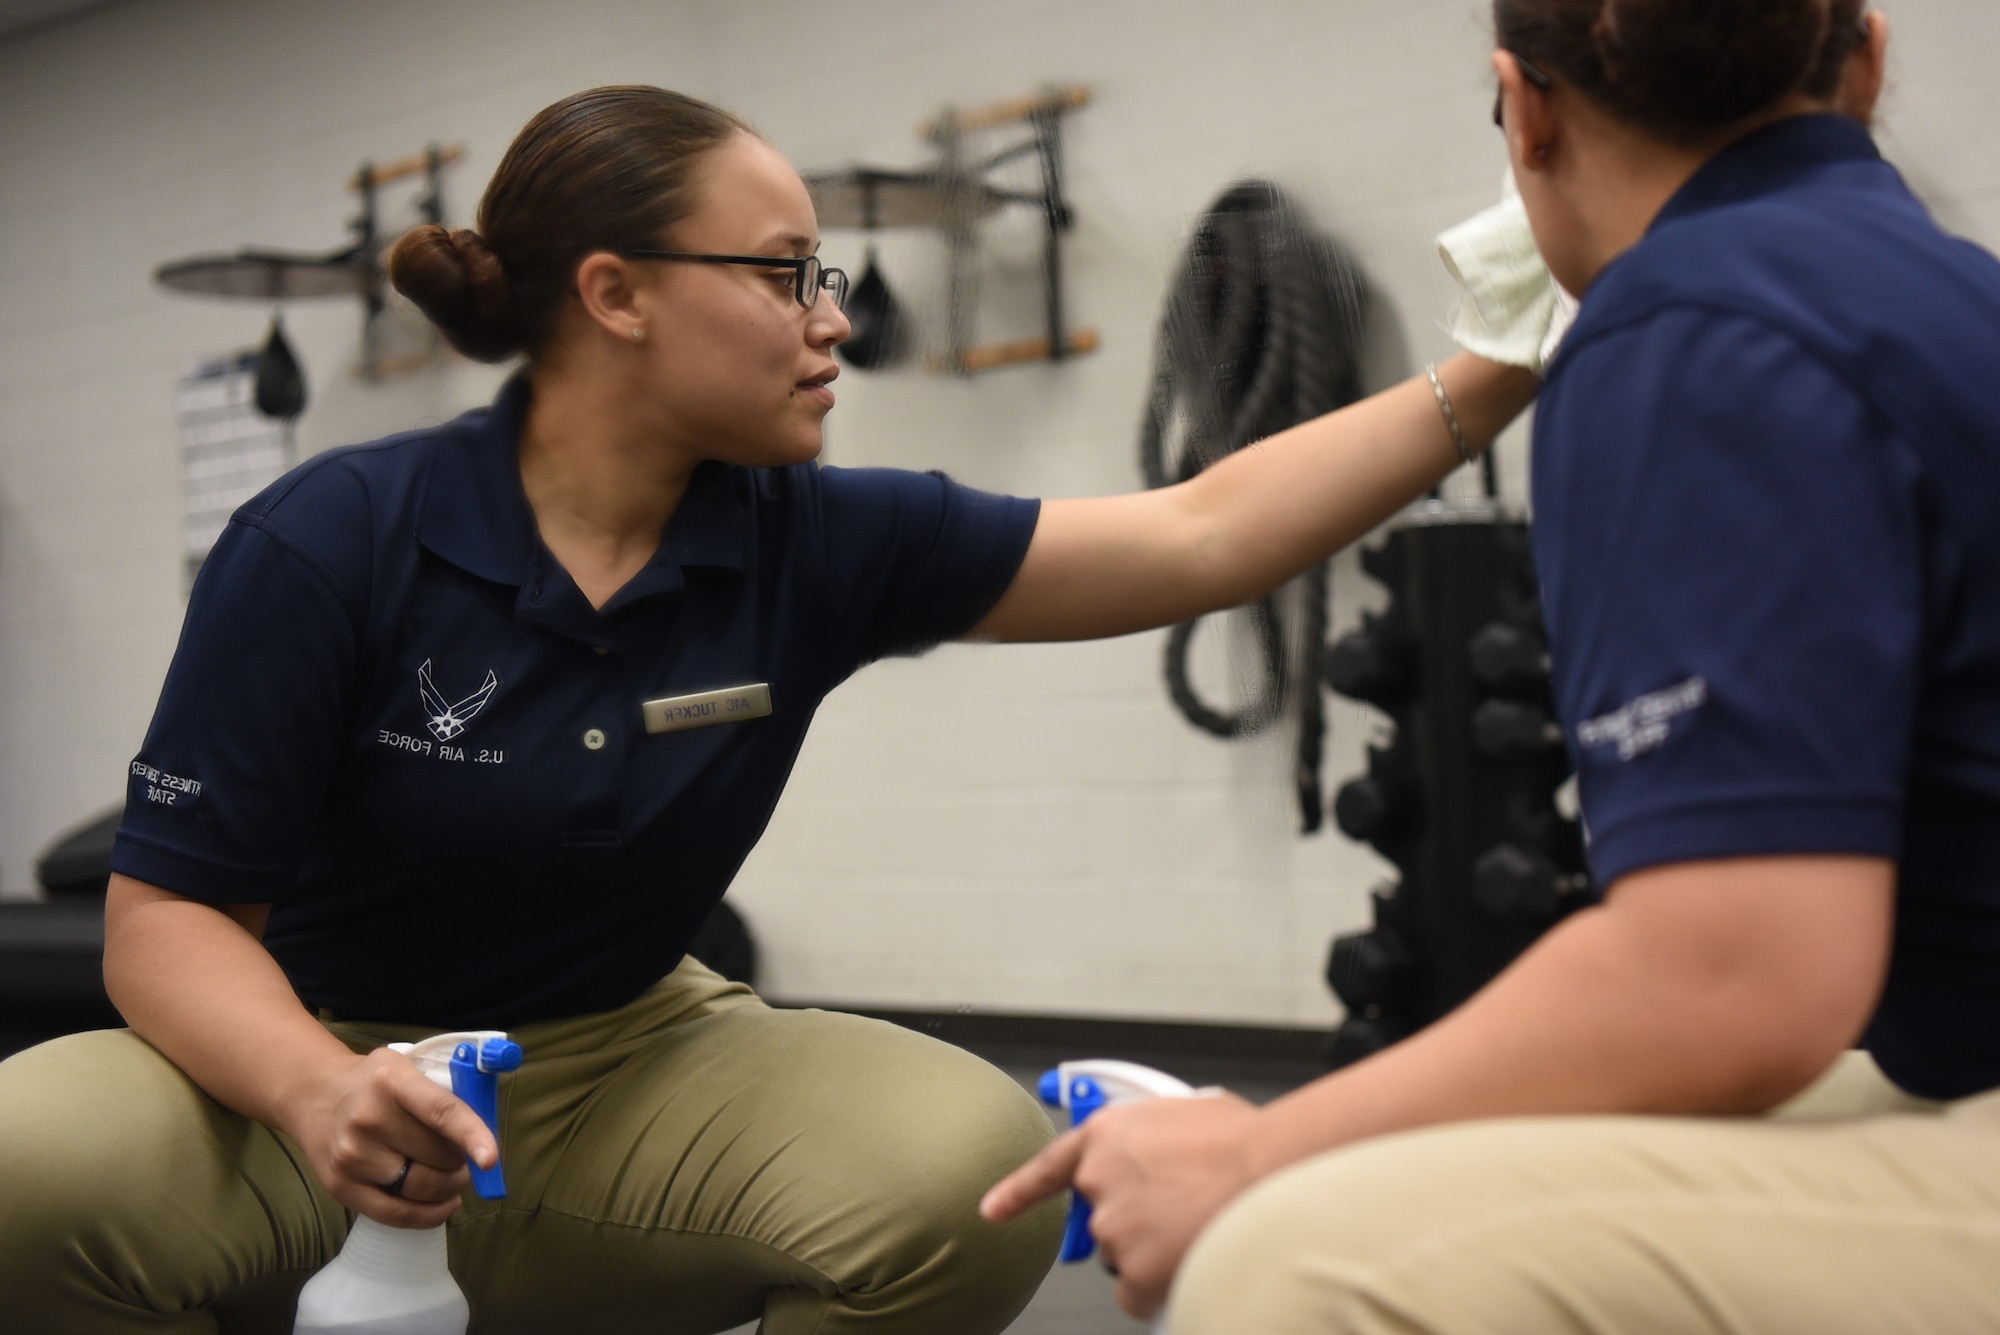 Airman 1st Class Sasha Tucker, 22nd Force Support Squadron fitness journeyman, cleans a mirror Aug. 6, 2019, at McConnell Air Force Base, Kan. The center is cleaned daily by the team of 15 Airmen who, re-rack weights, ensure all equipment is sanitized and do laundry hourly. These FSS Airmen keep the gym clean and functional for over 550 visitors daily. (U.S. Air Force photo by Airman 1st Class Alexi Myrick)